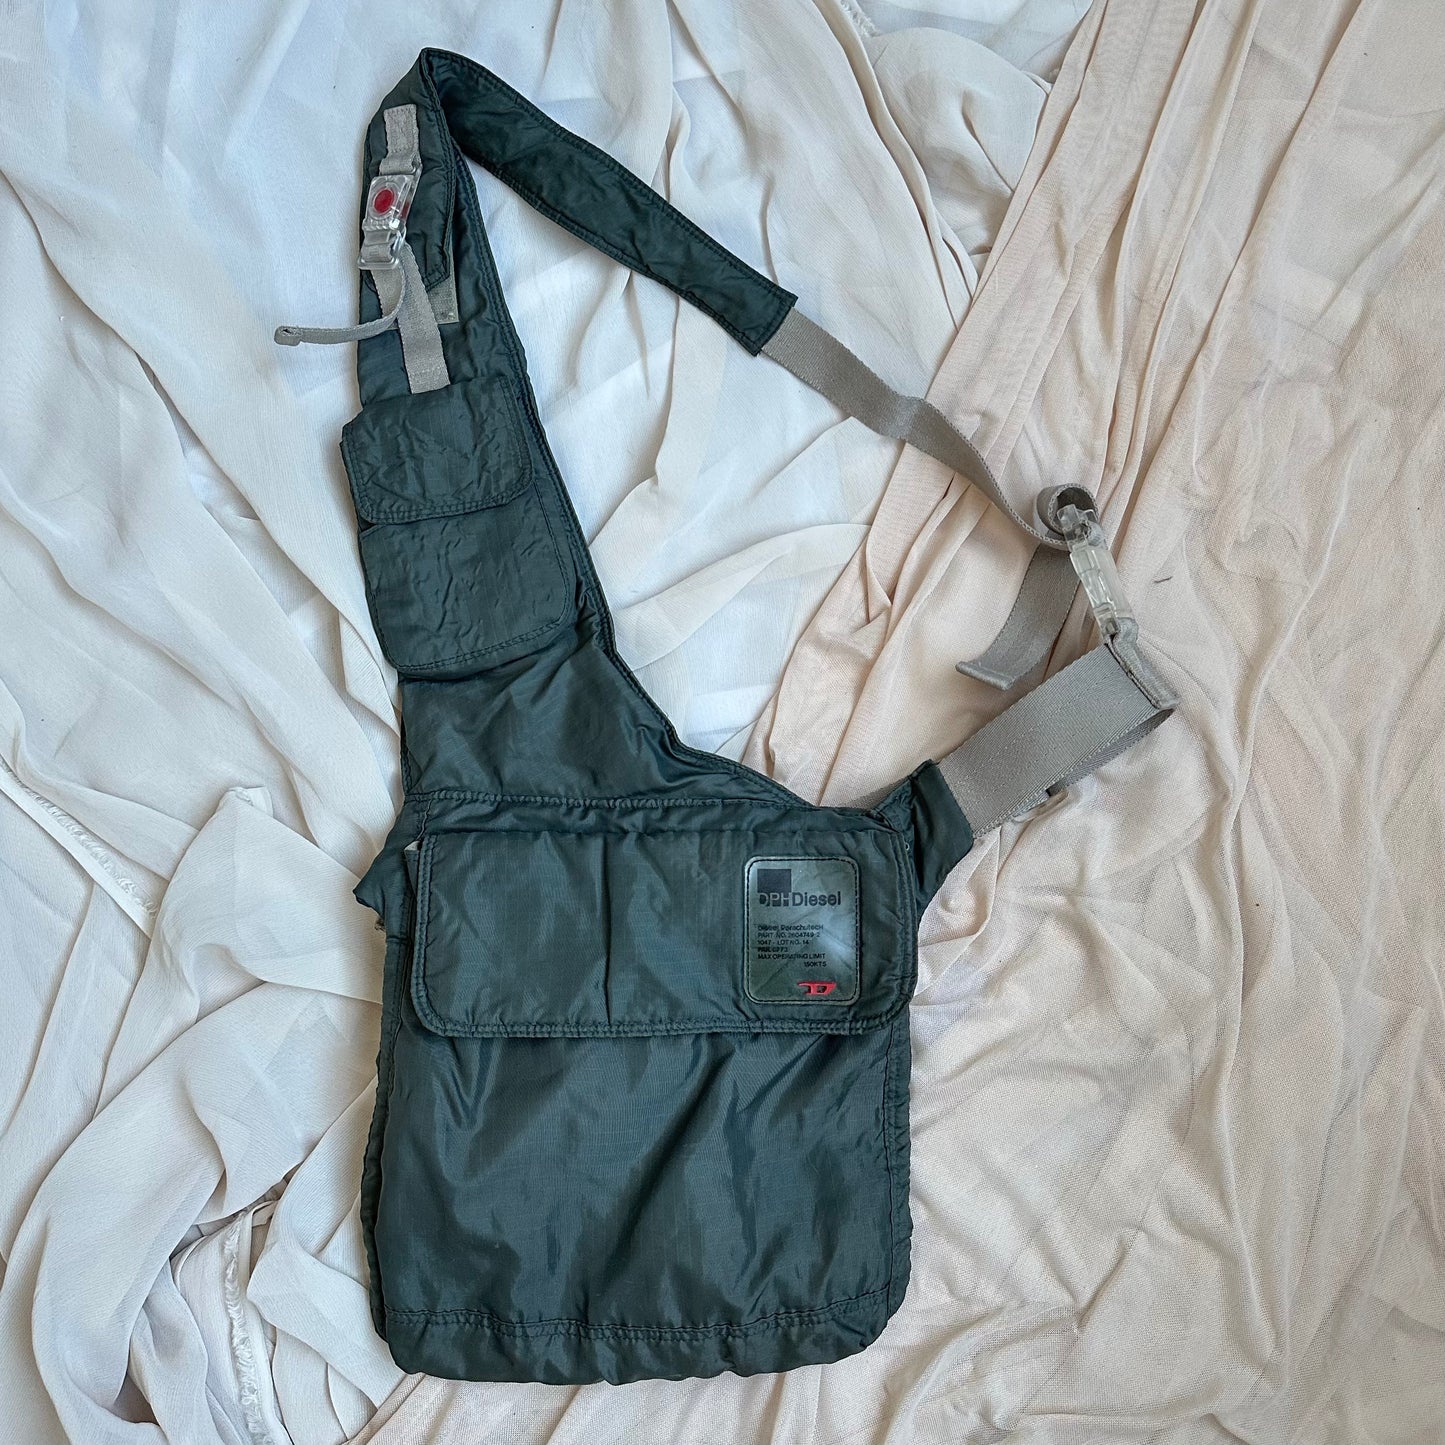 TECHNICAL BODY HARNESS BAG by Diesel